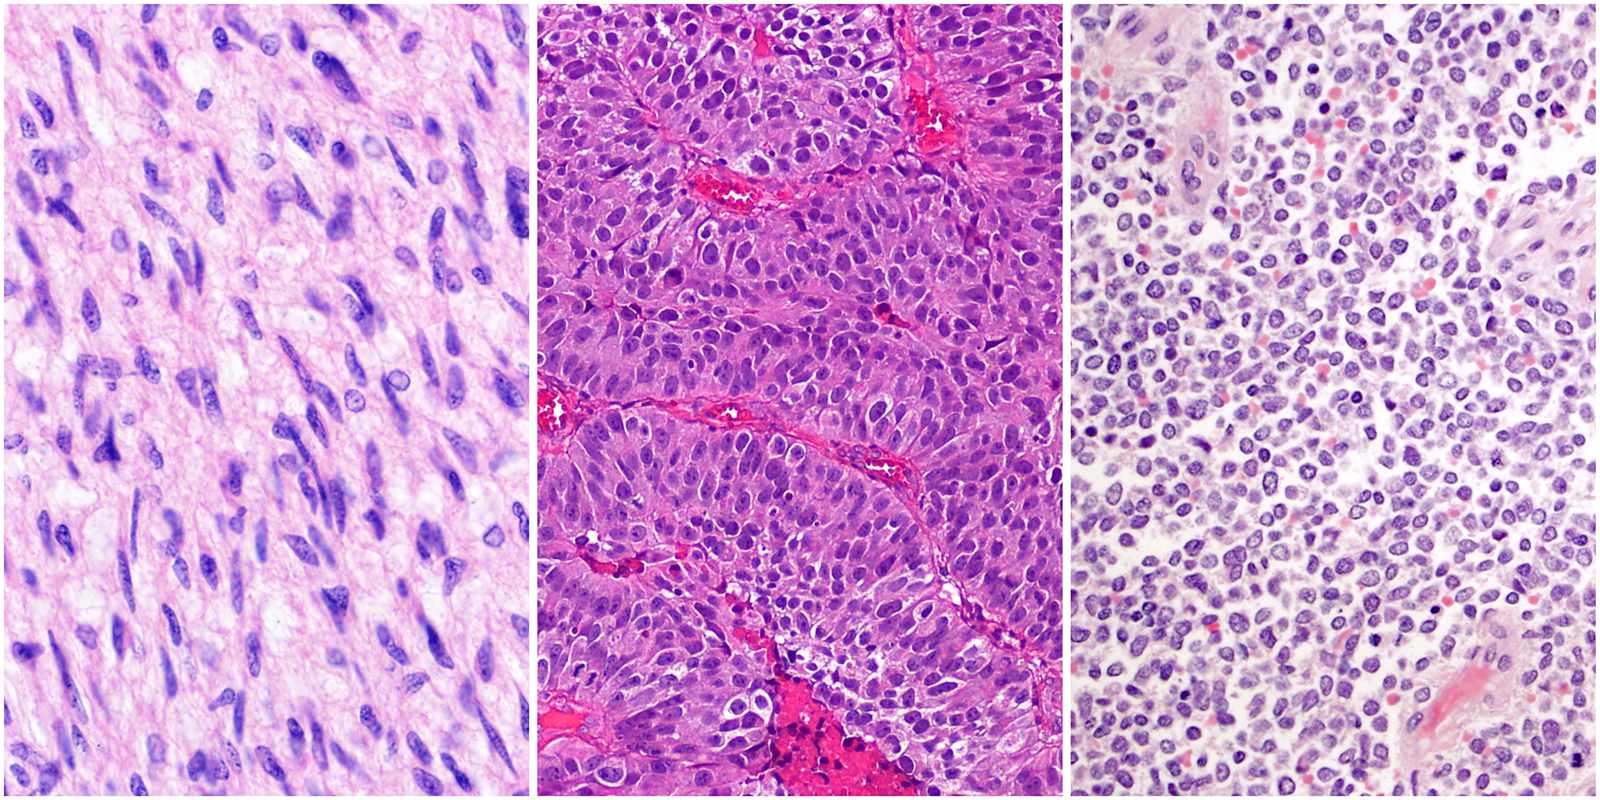 Histology images of glioblastoma, bladder cancer, and Ewing sarcoma